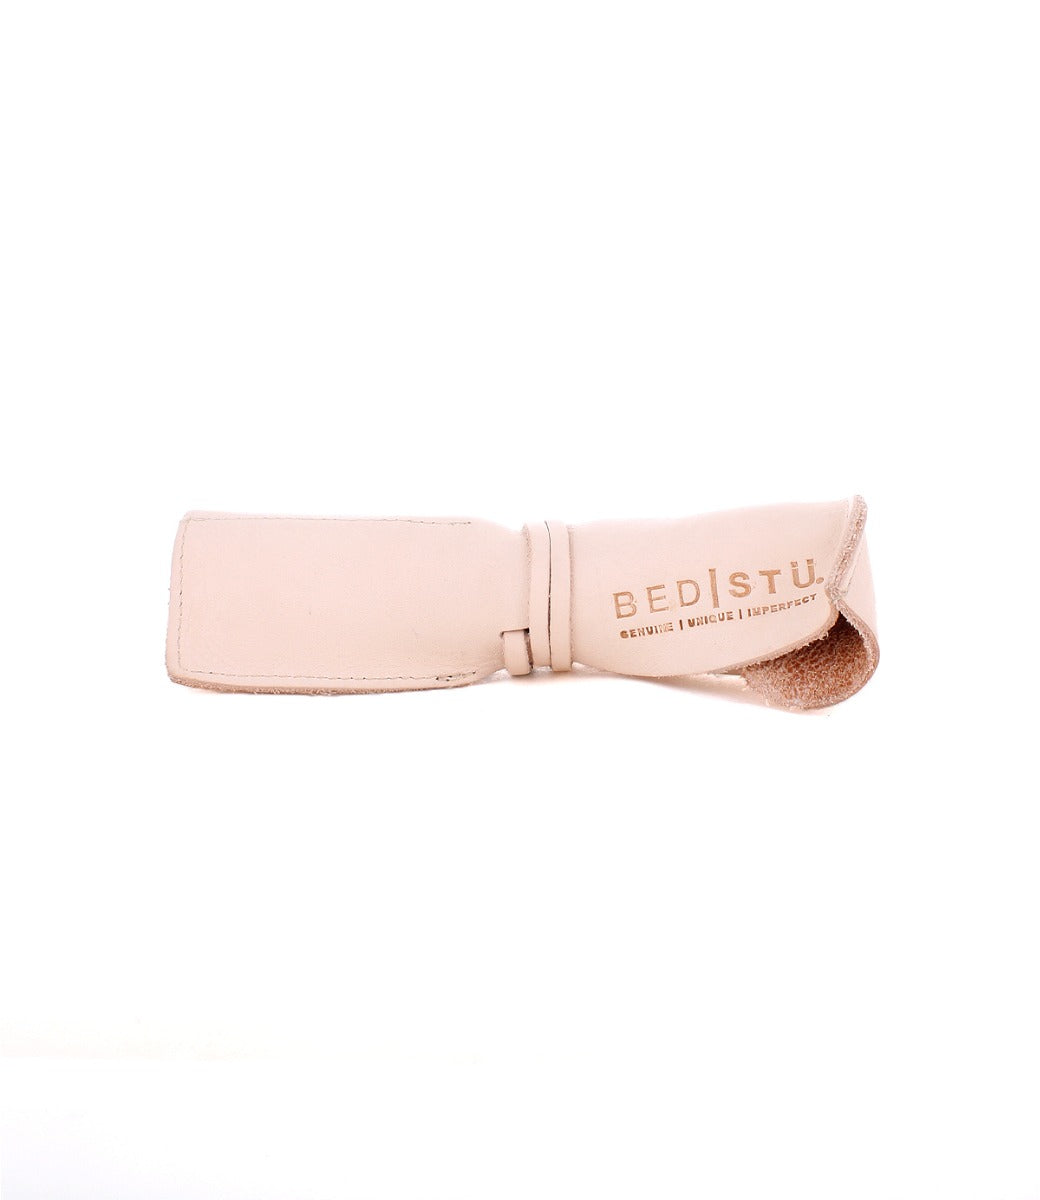 A Prepped by Bed Stu pink leather pencil case on a white background.